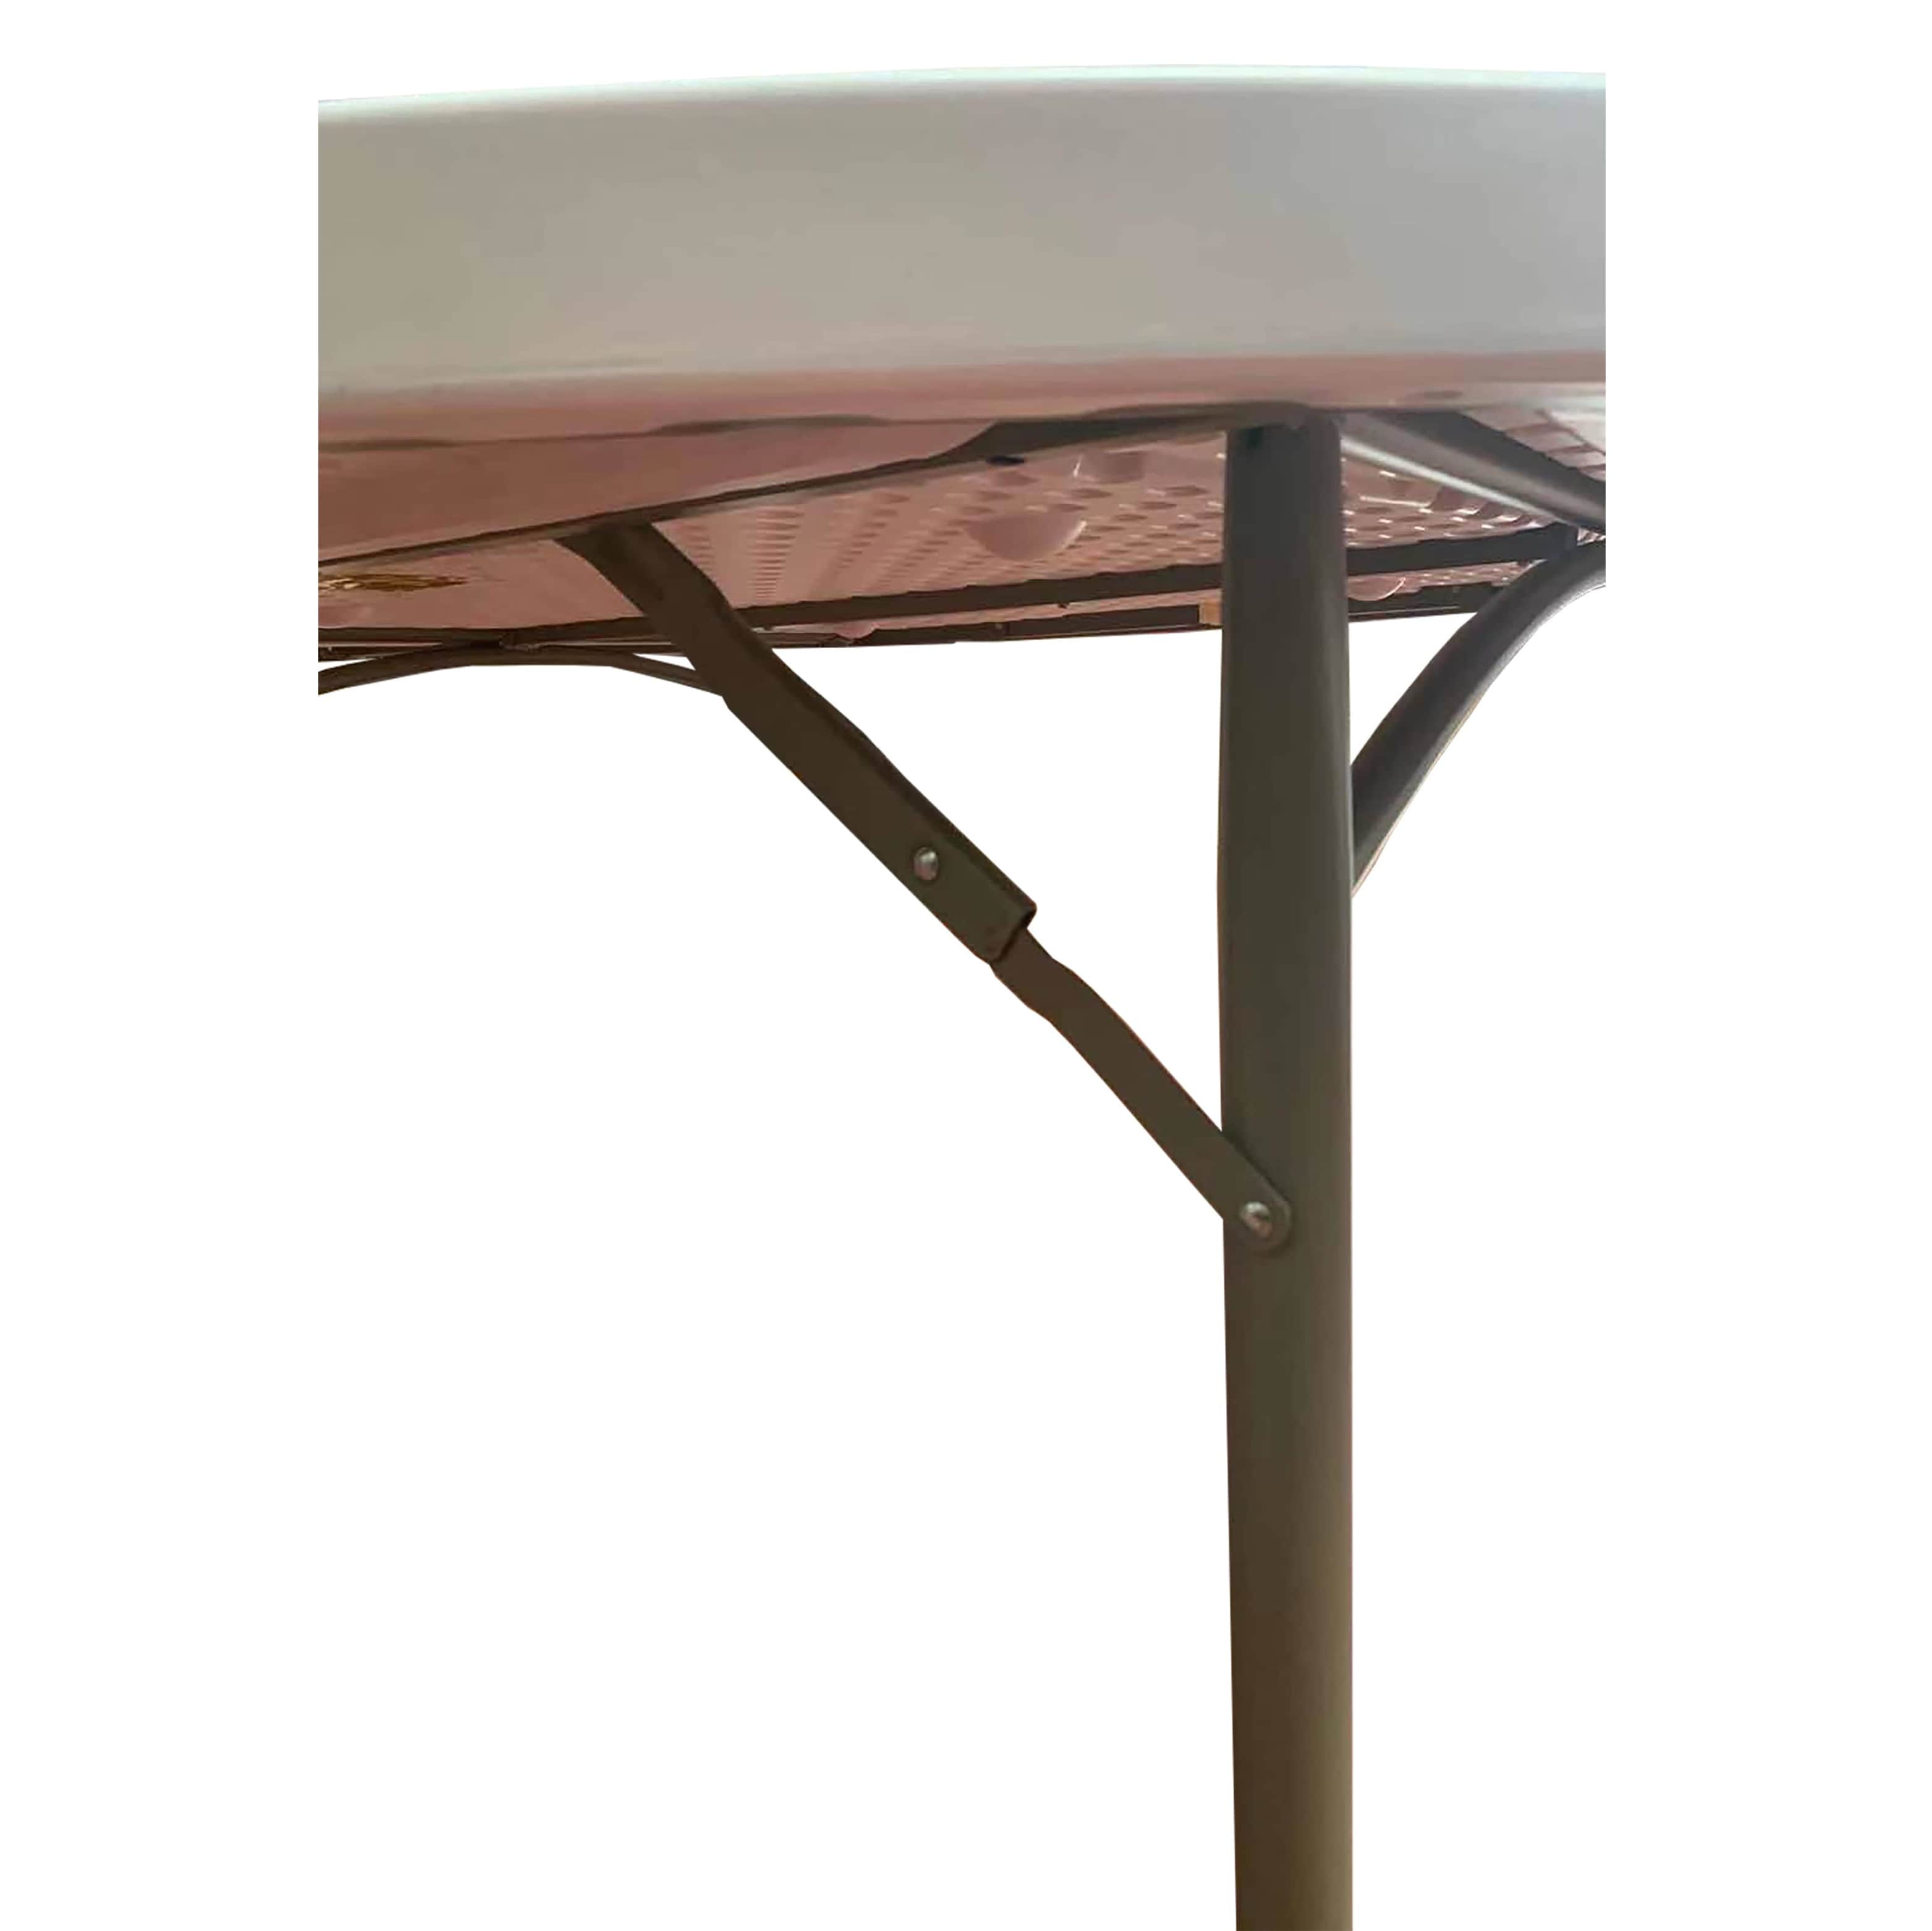 60-inch round folding table 152cm Dia / 8 people / light commercial